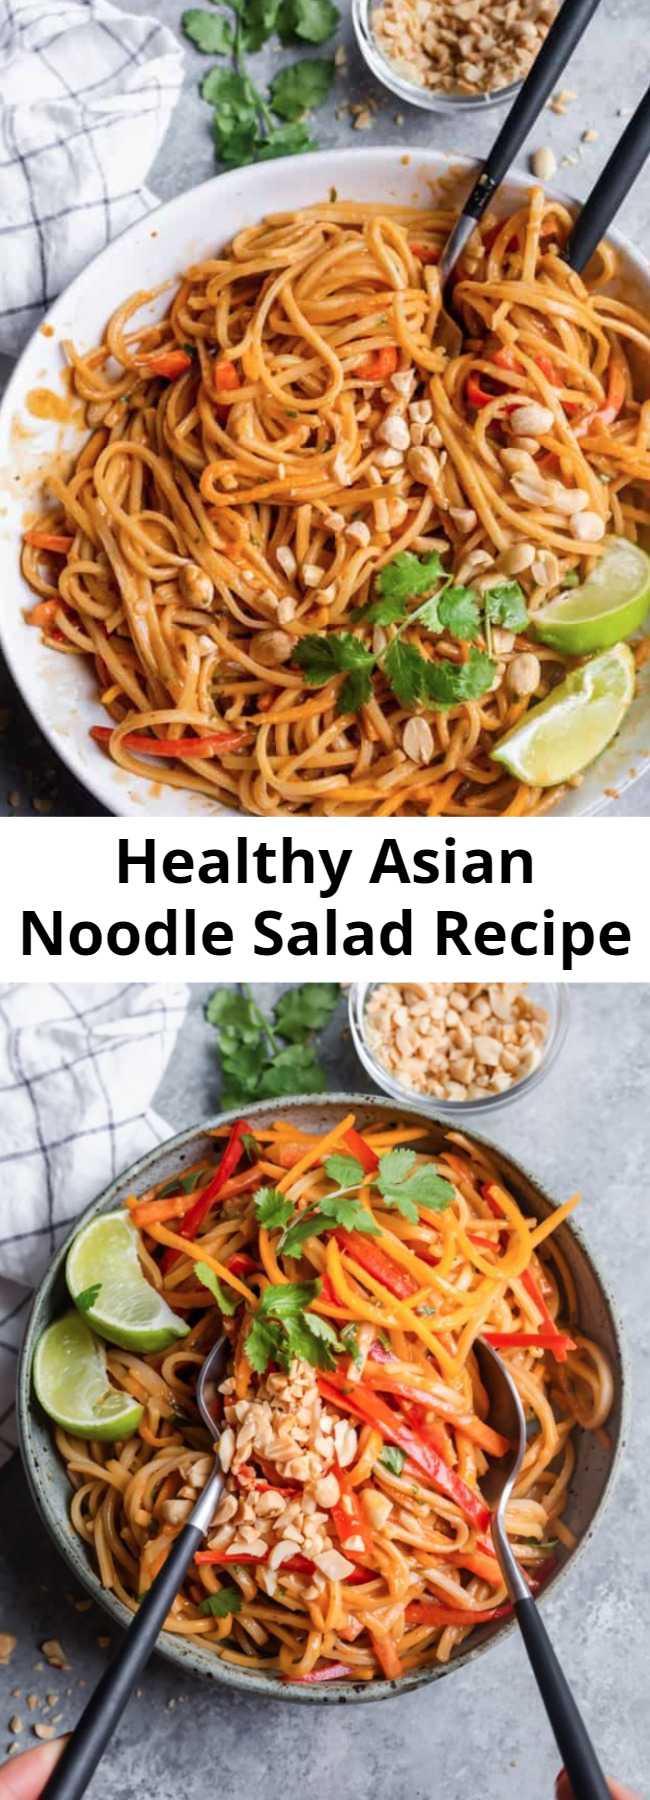 Asian Noodle Salad Recipe - This bright and colorful Asian Noodle Salad is a gluten-free vegan meal that's filled with fresh vegetables and tossed in a spicy creamy nutty dressing #noodles #asianfood #healthyrecipes #salad